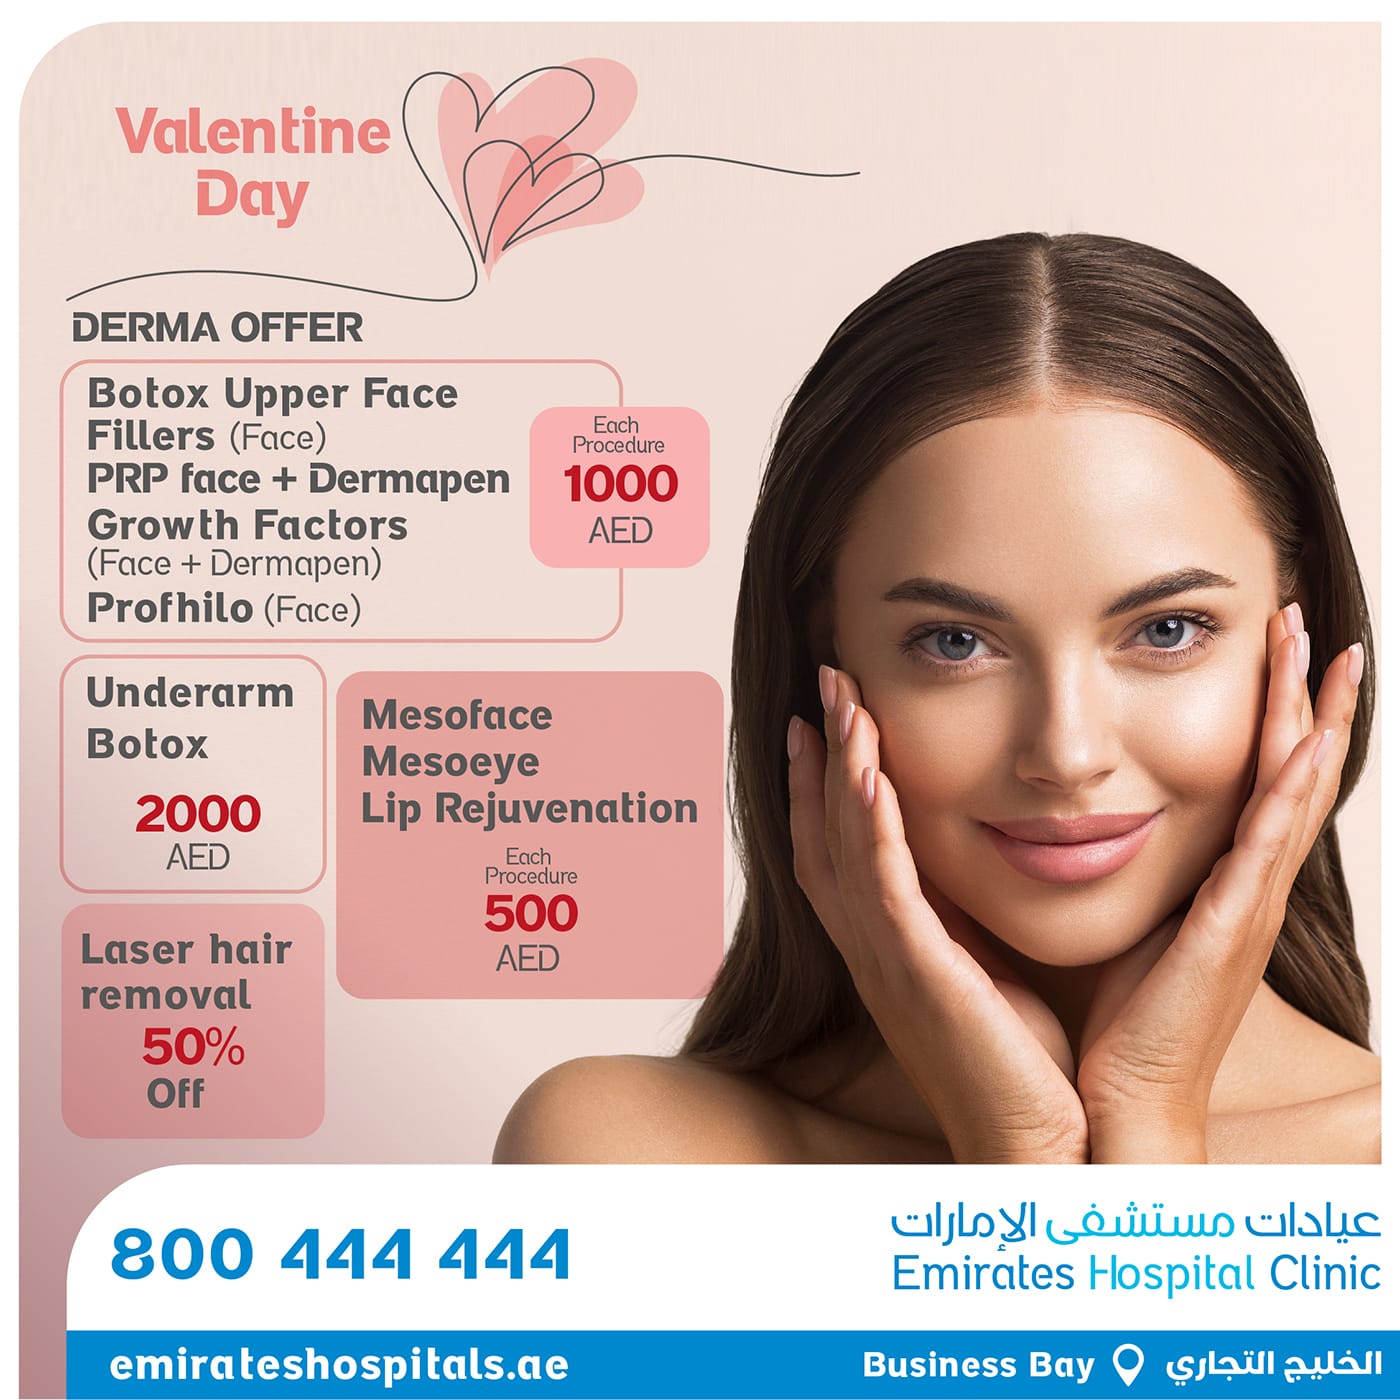 Valentine’s Day Dermatology Special Offers , Emirates Hospital Clinic, Business Bay